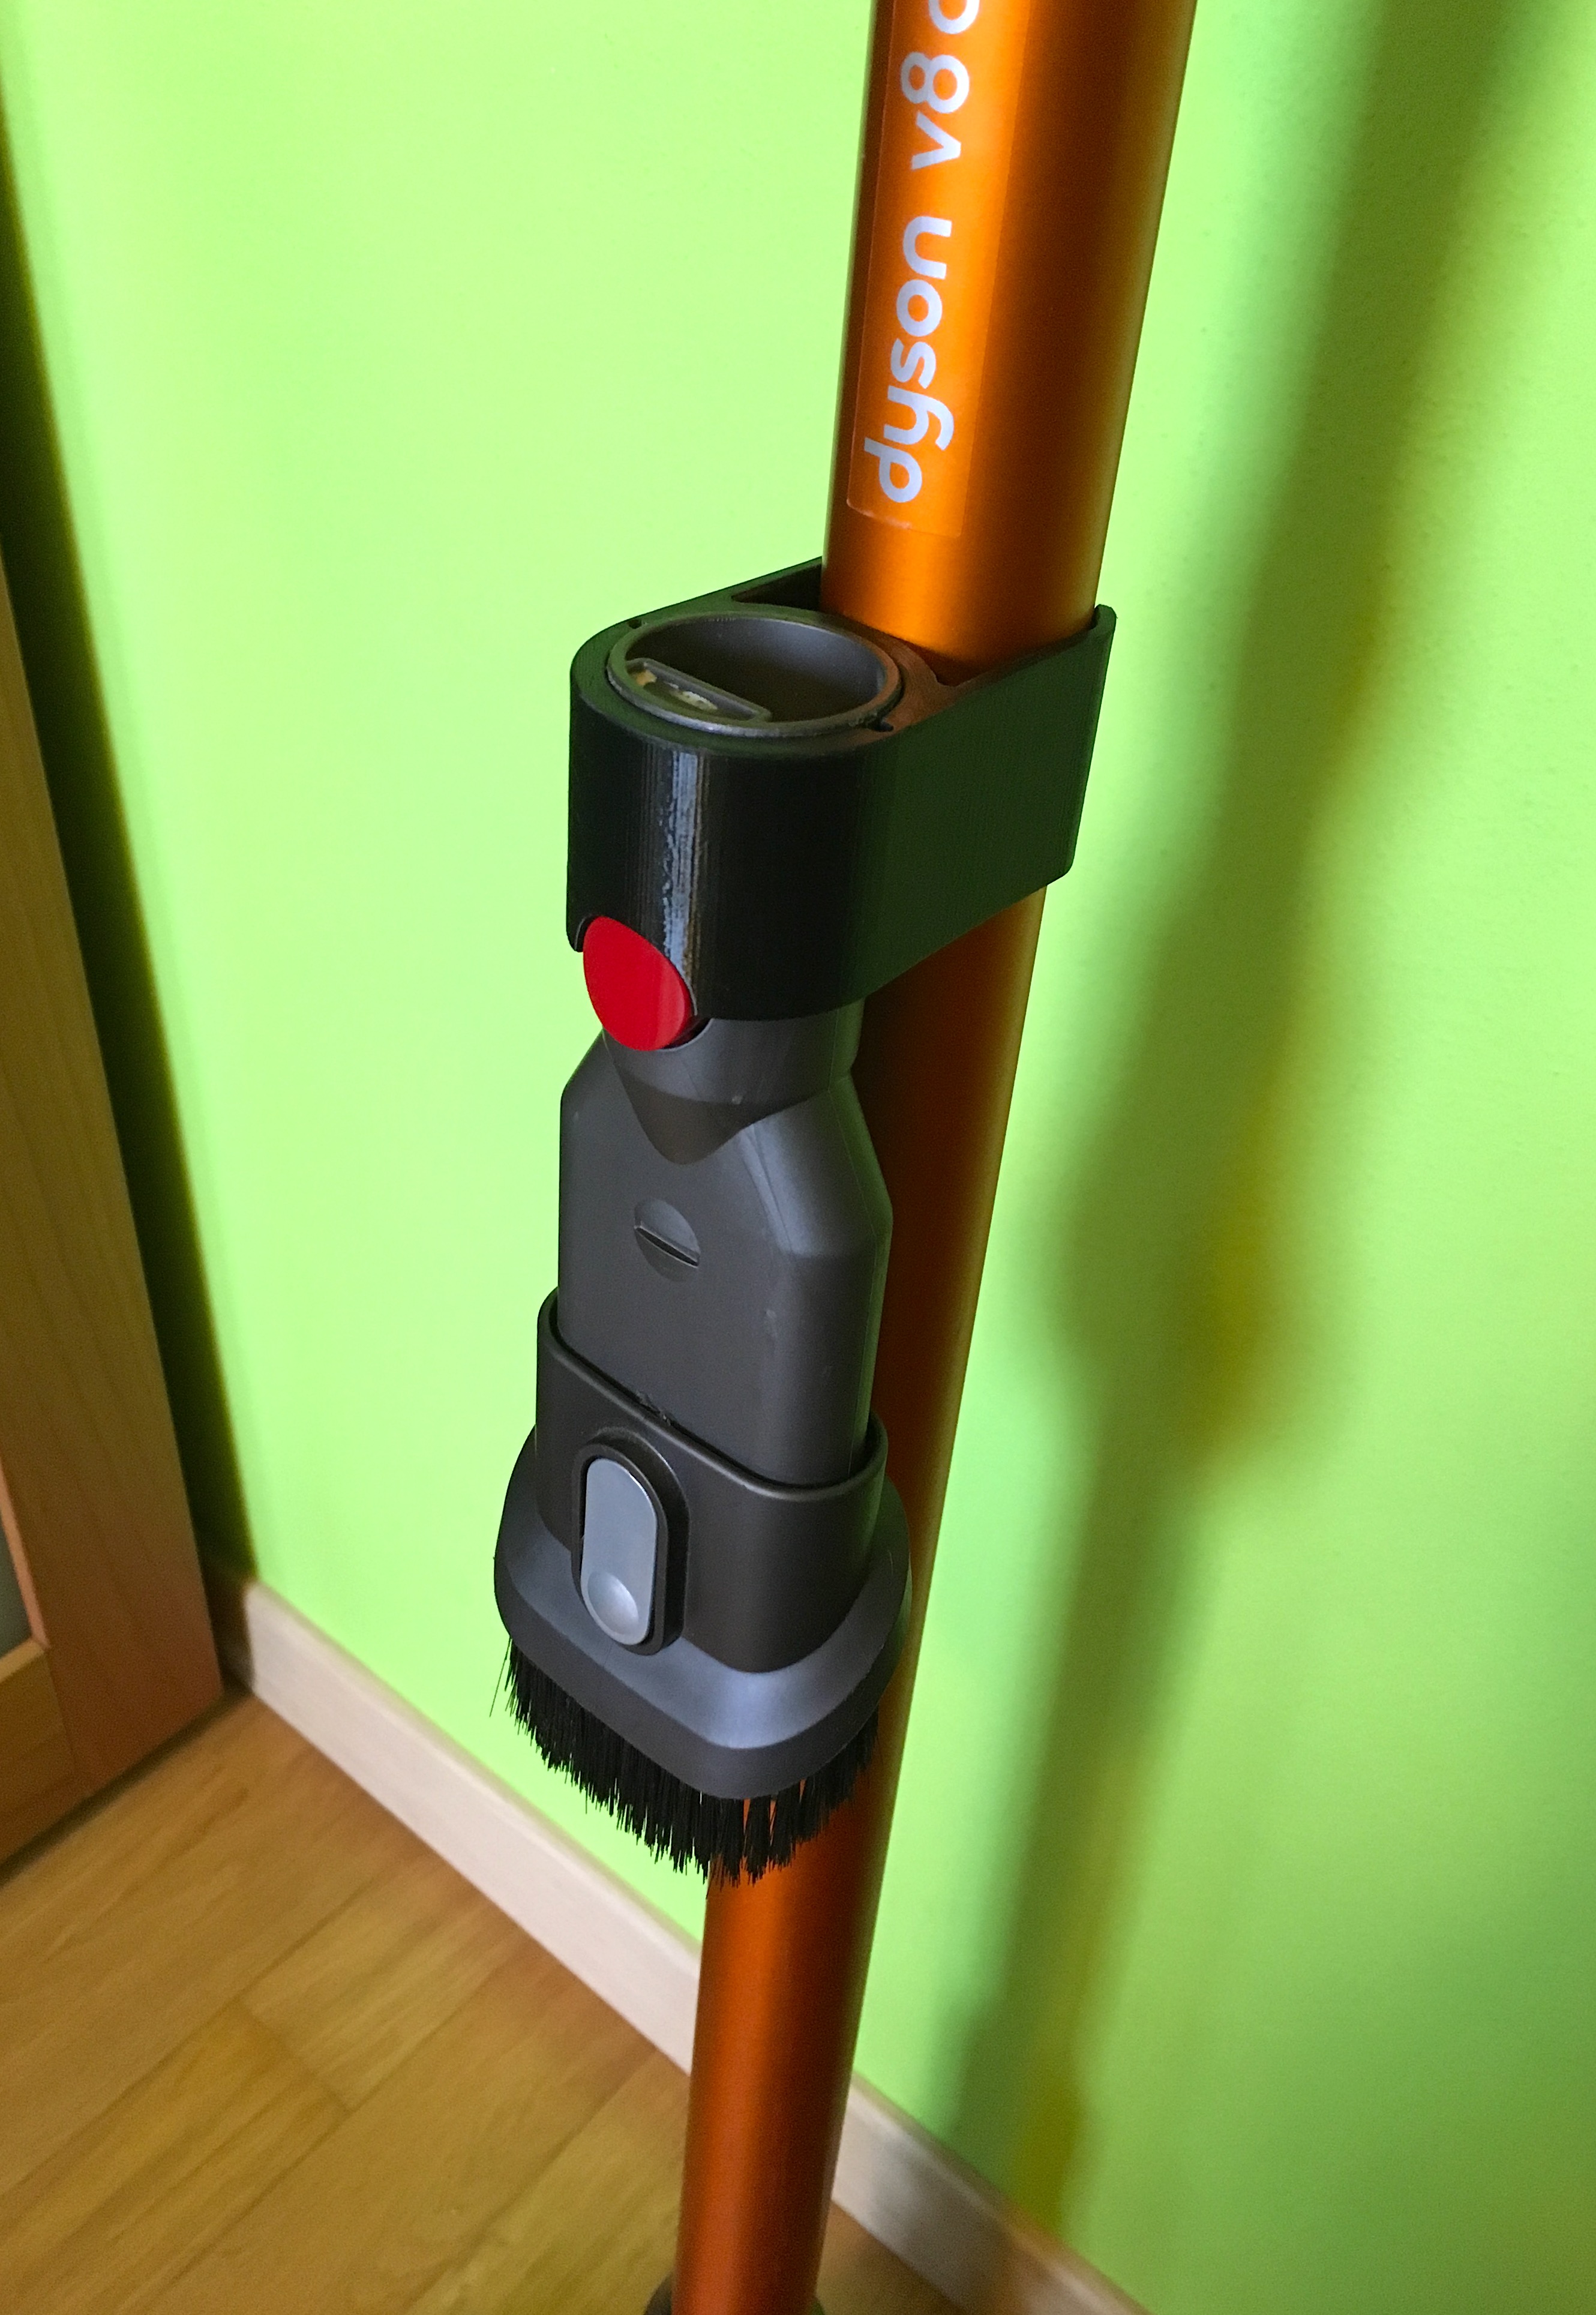 Dyson accessory holder for extension wand